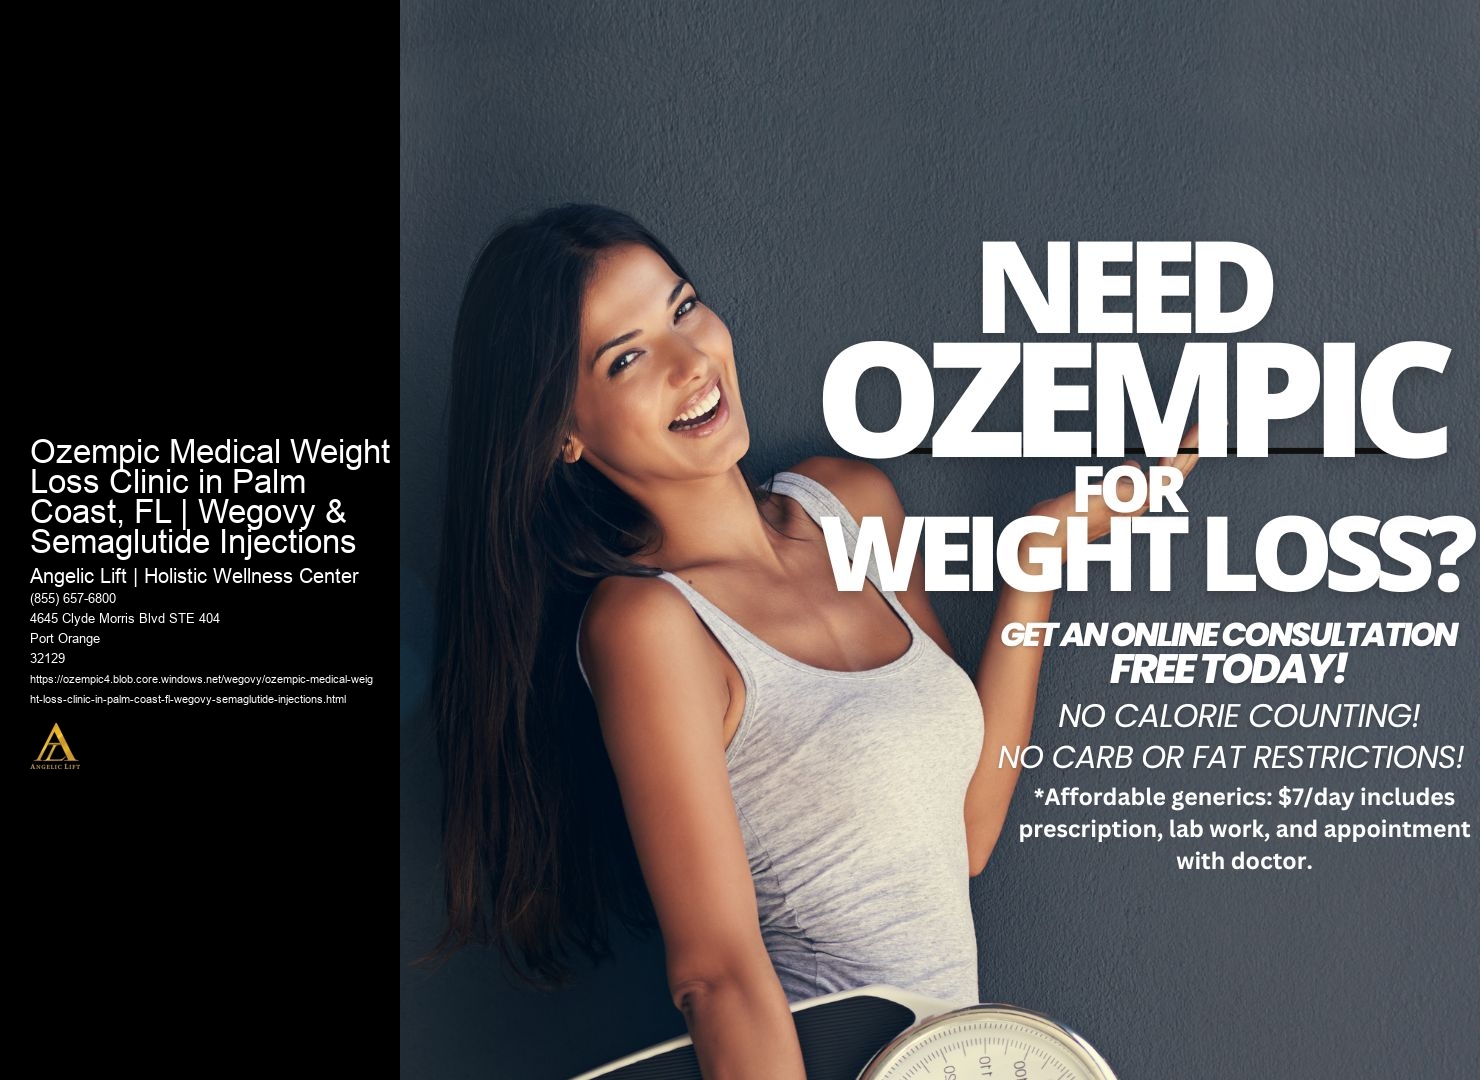 Ozempic Medical Weight Loss Clinic in Palm Coast, FL | Wegovy & Semaglutide Injections